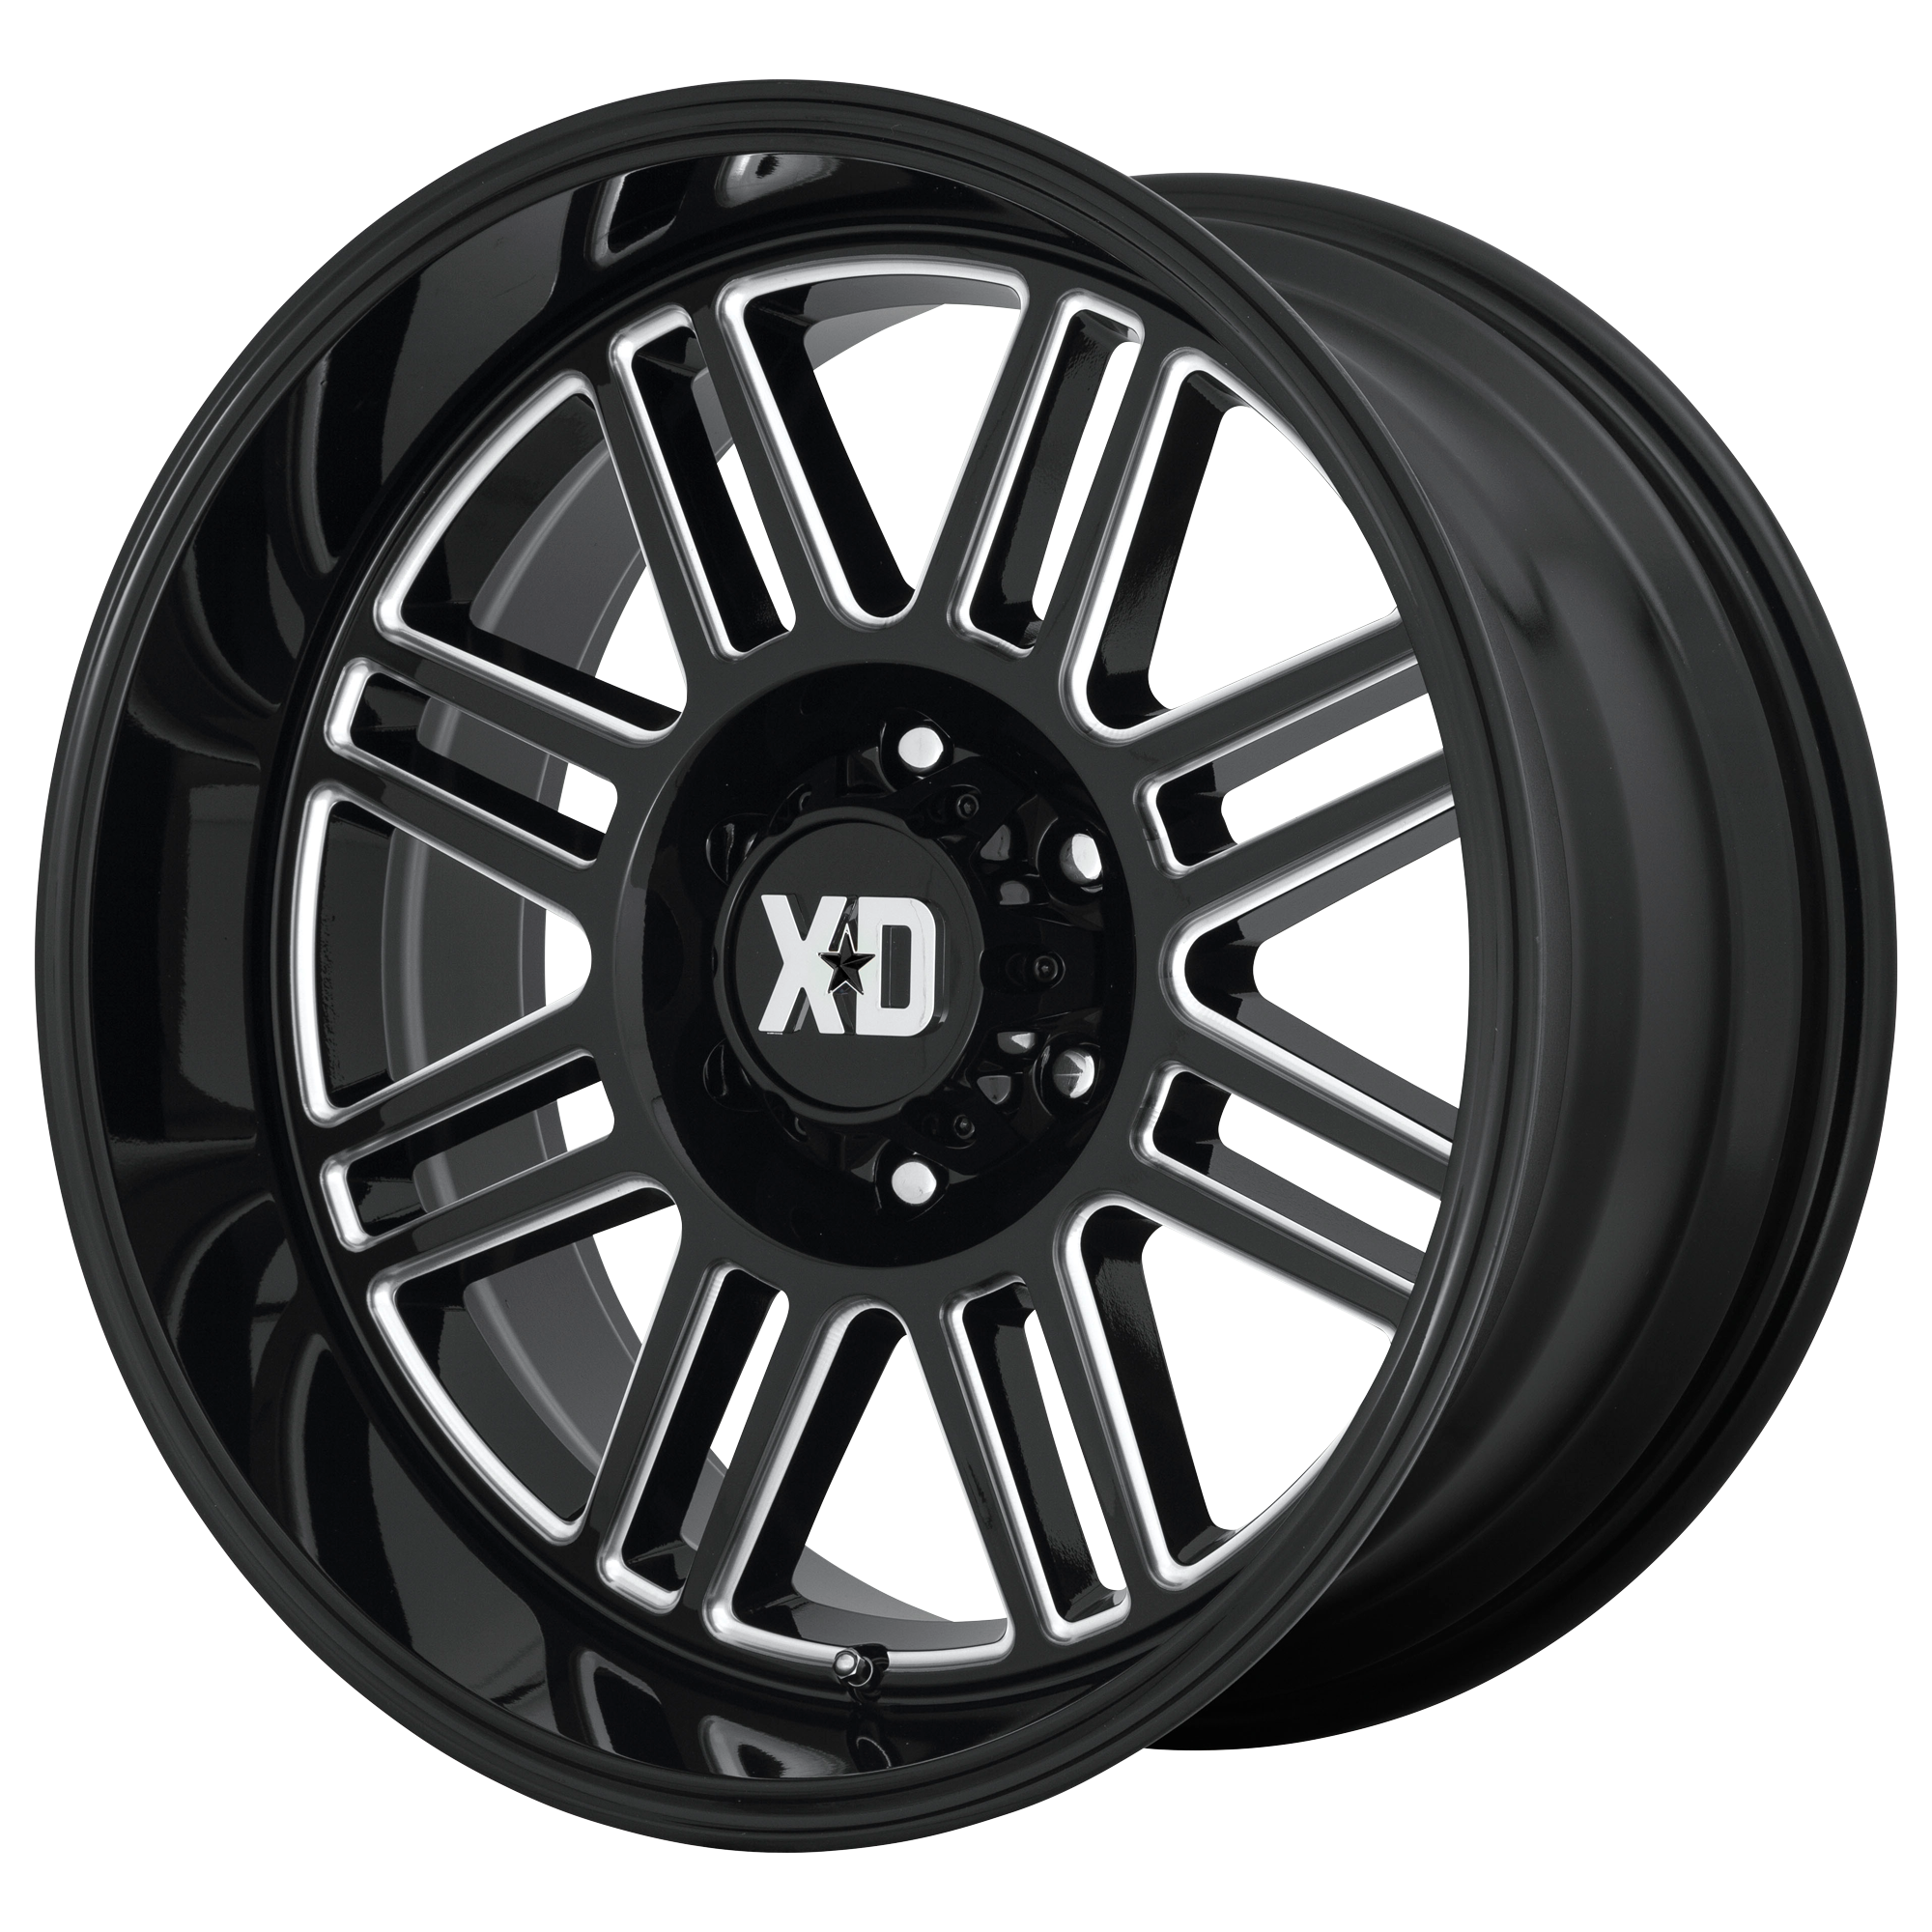 CAGE 20x10 8x180.00 GLOSS BLACK MILLED (-18 mm) - Tires and Engine Performance